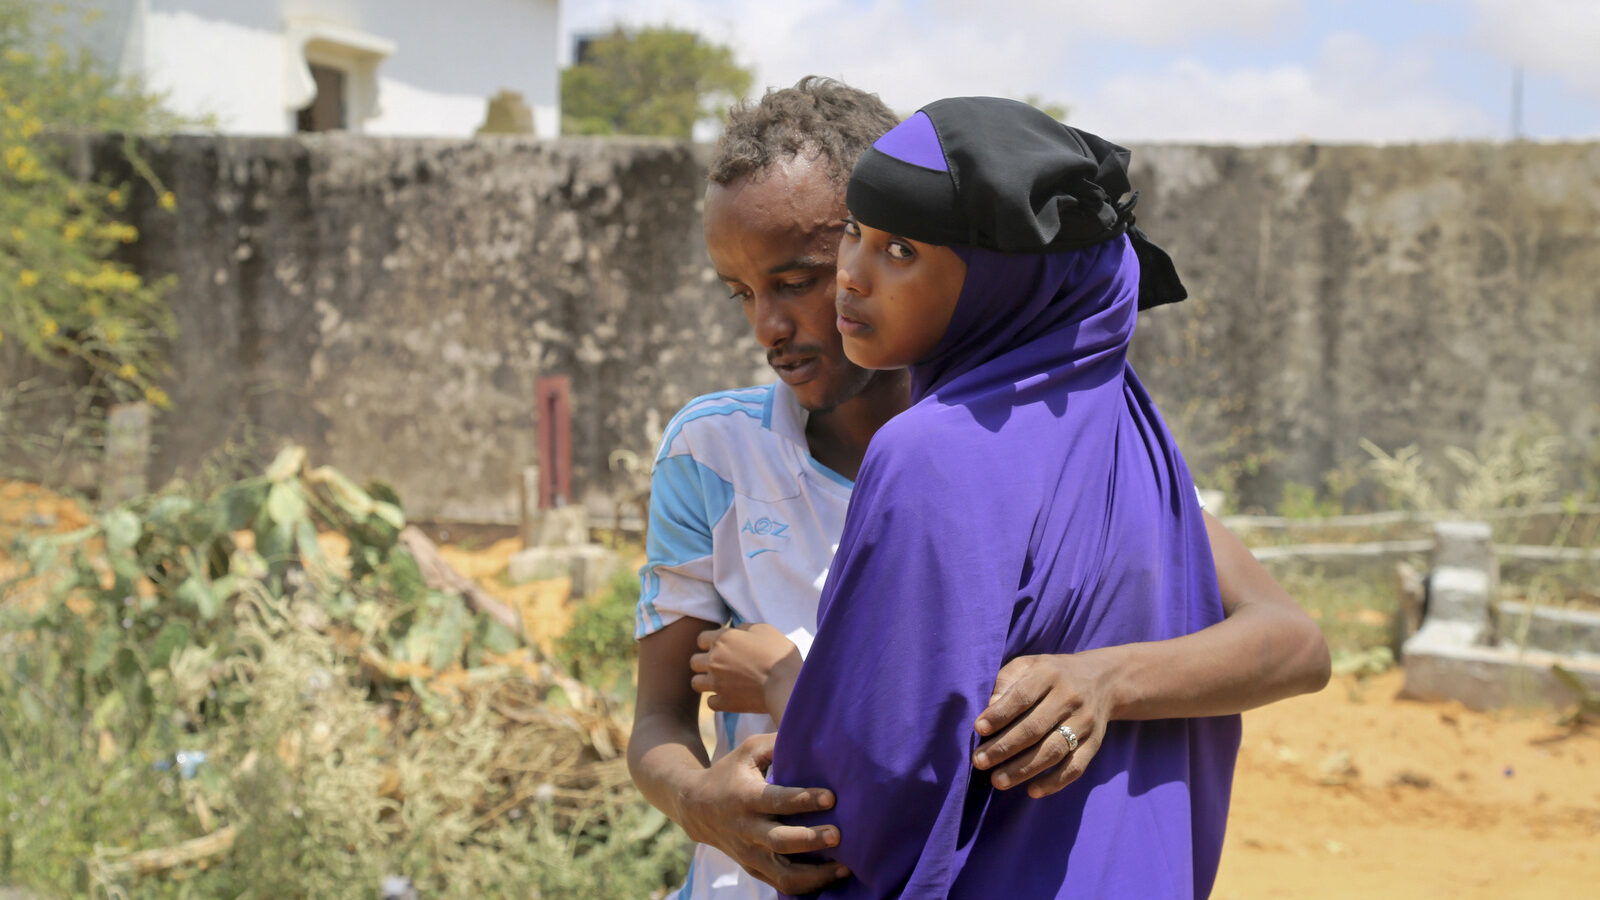 Zakariye Abdirisaq, left, who lost both his father and aunt in the bombing, is comforted by his cousin as they stand next to his father's grave, at a cemetery in Mogadishu, Somalia Tuesday, Oct. 17, 2017. Anguished families gathered across Somalia's capital on Tuesday as funerals continued for the more than 300 people killed in one of the world's deadliest attacks in years, while others waited anxiously for any word of the scores of people still said to be missing. (AP/Mohamed Sheikh Nor)